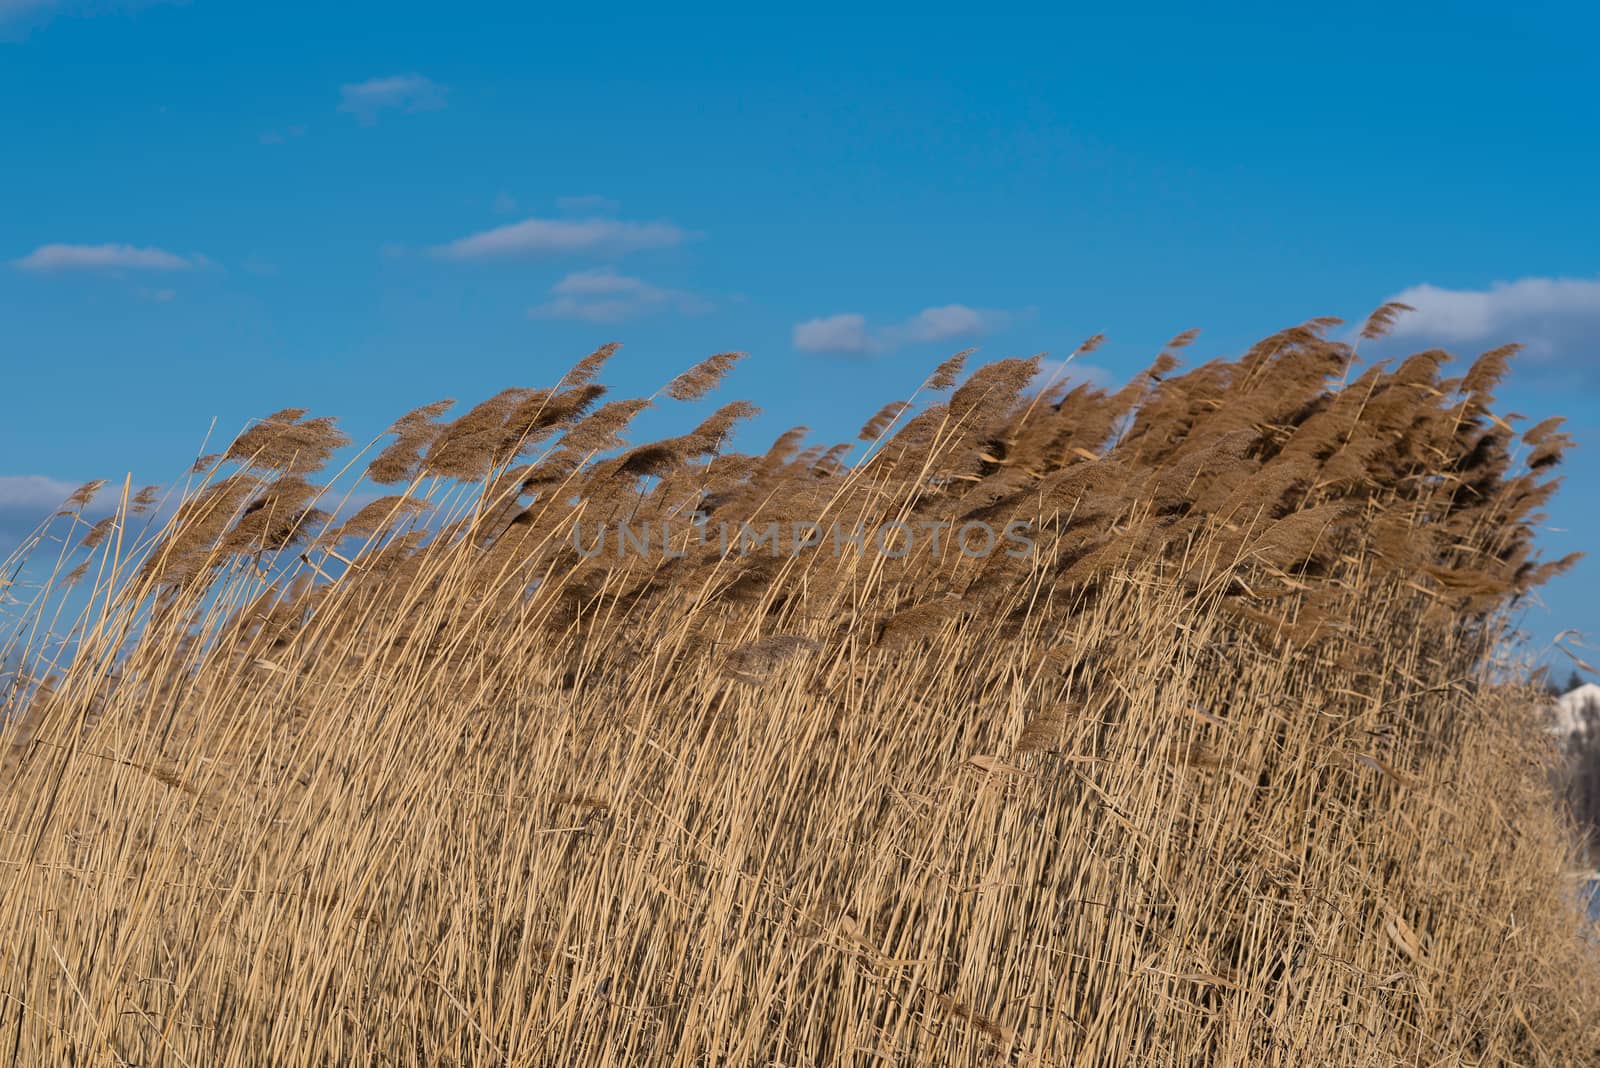 Swaying reed under blue sky with some clouds.